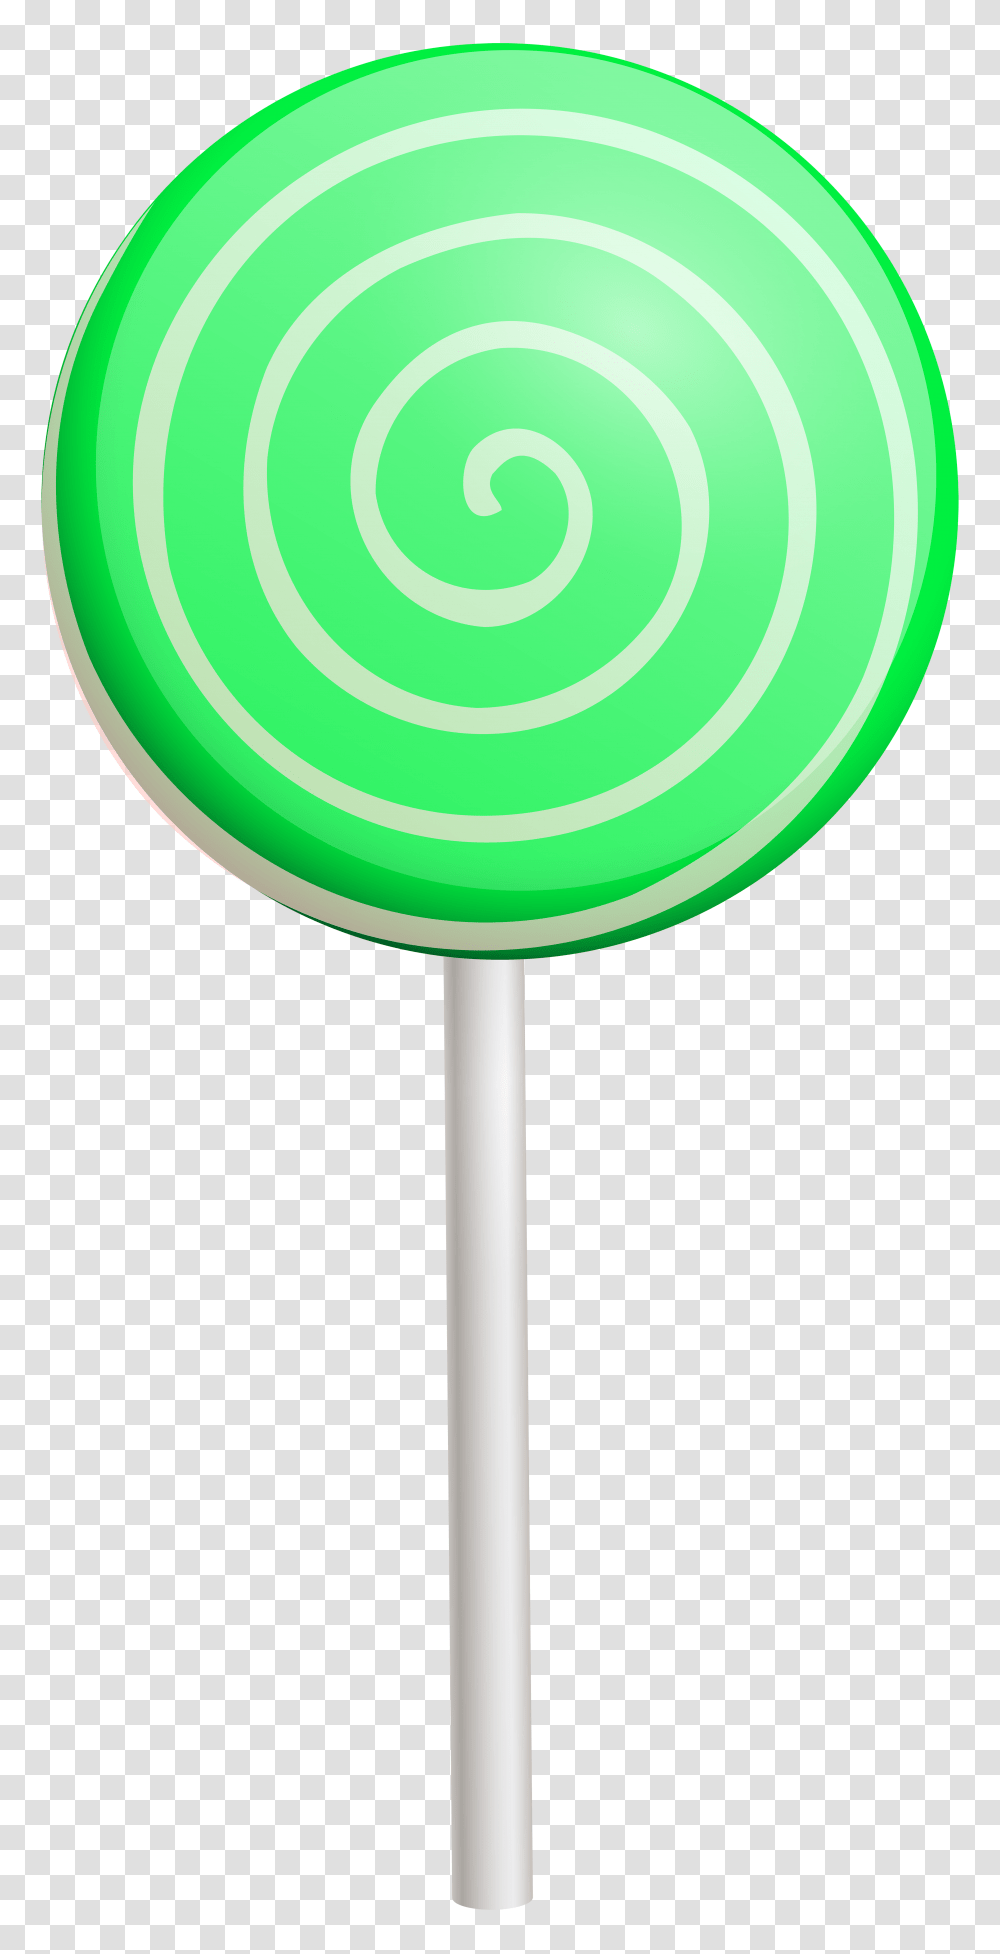 Green Swirl Lollipop Clip Art, Sweets, Food, Confectionery Transparent Png